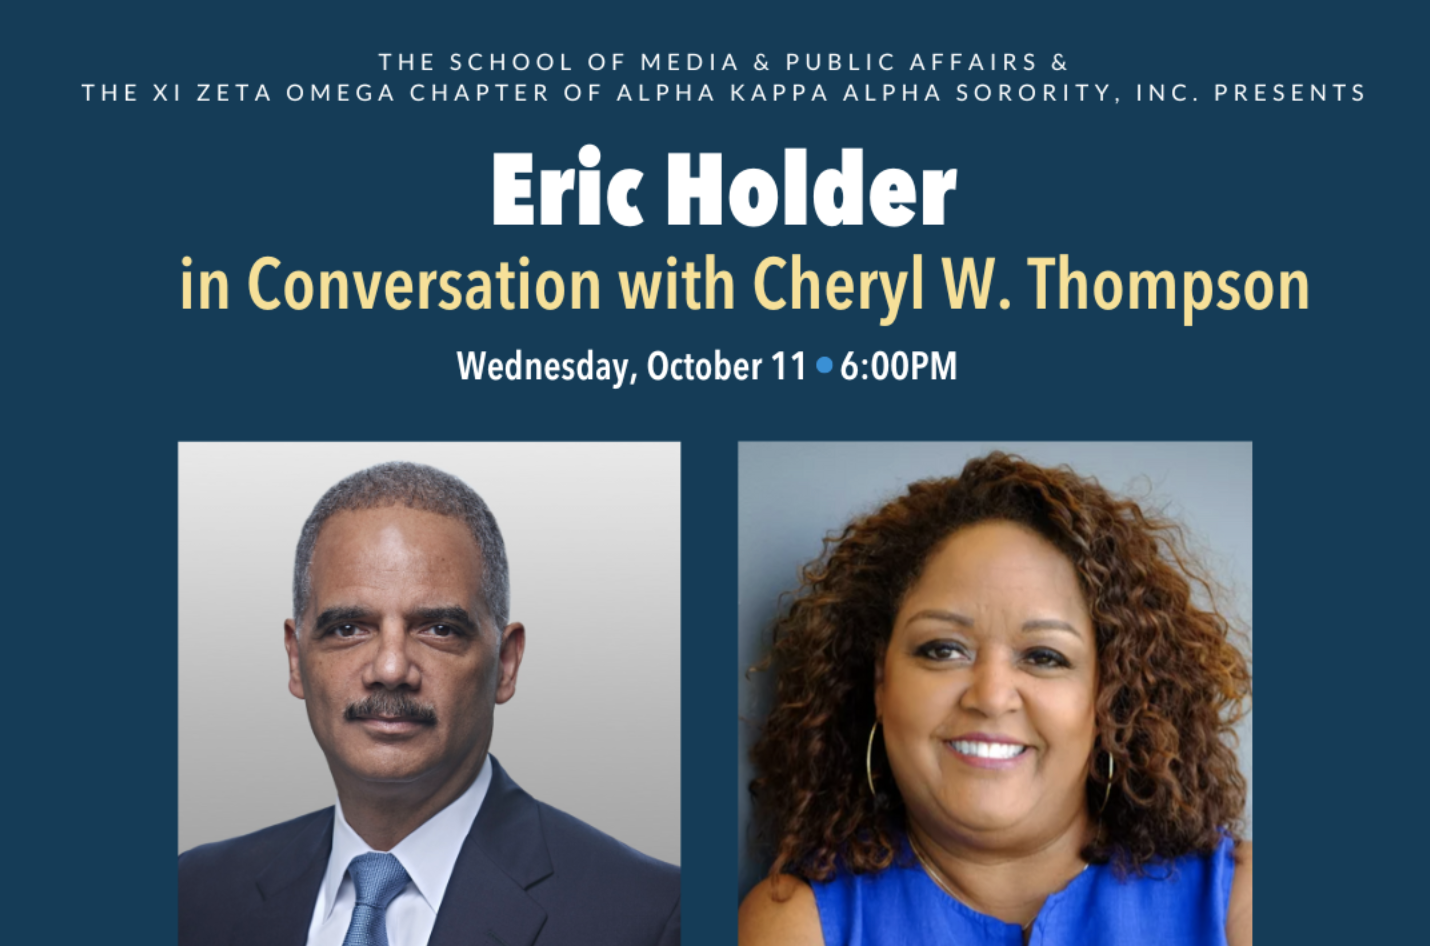 Eric Holder in Conversation with Cheryl W. Thompson